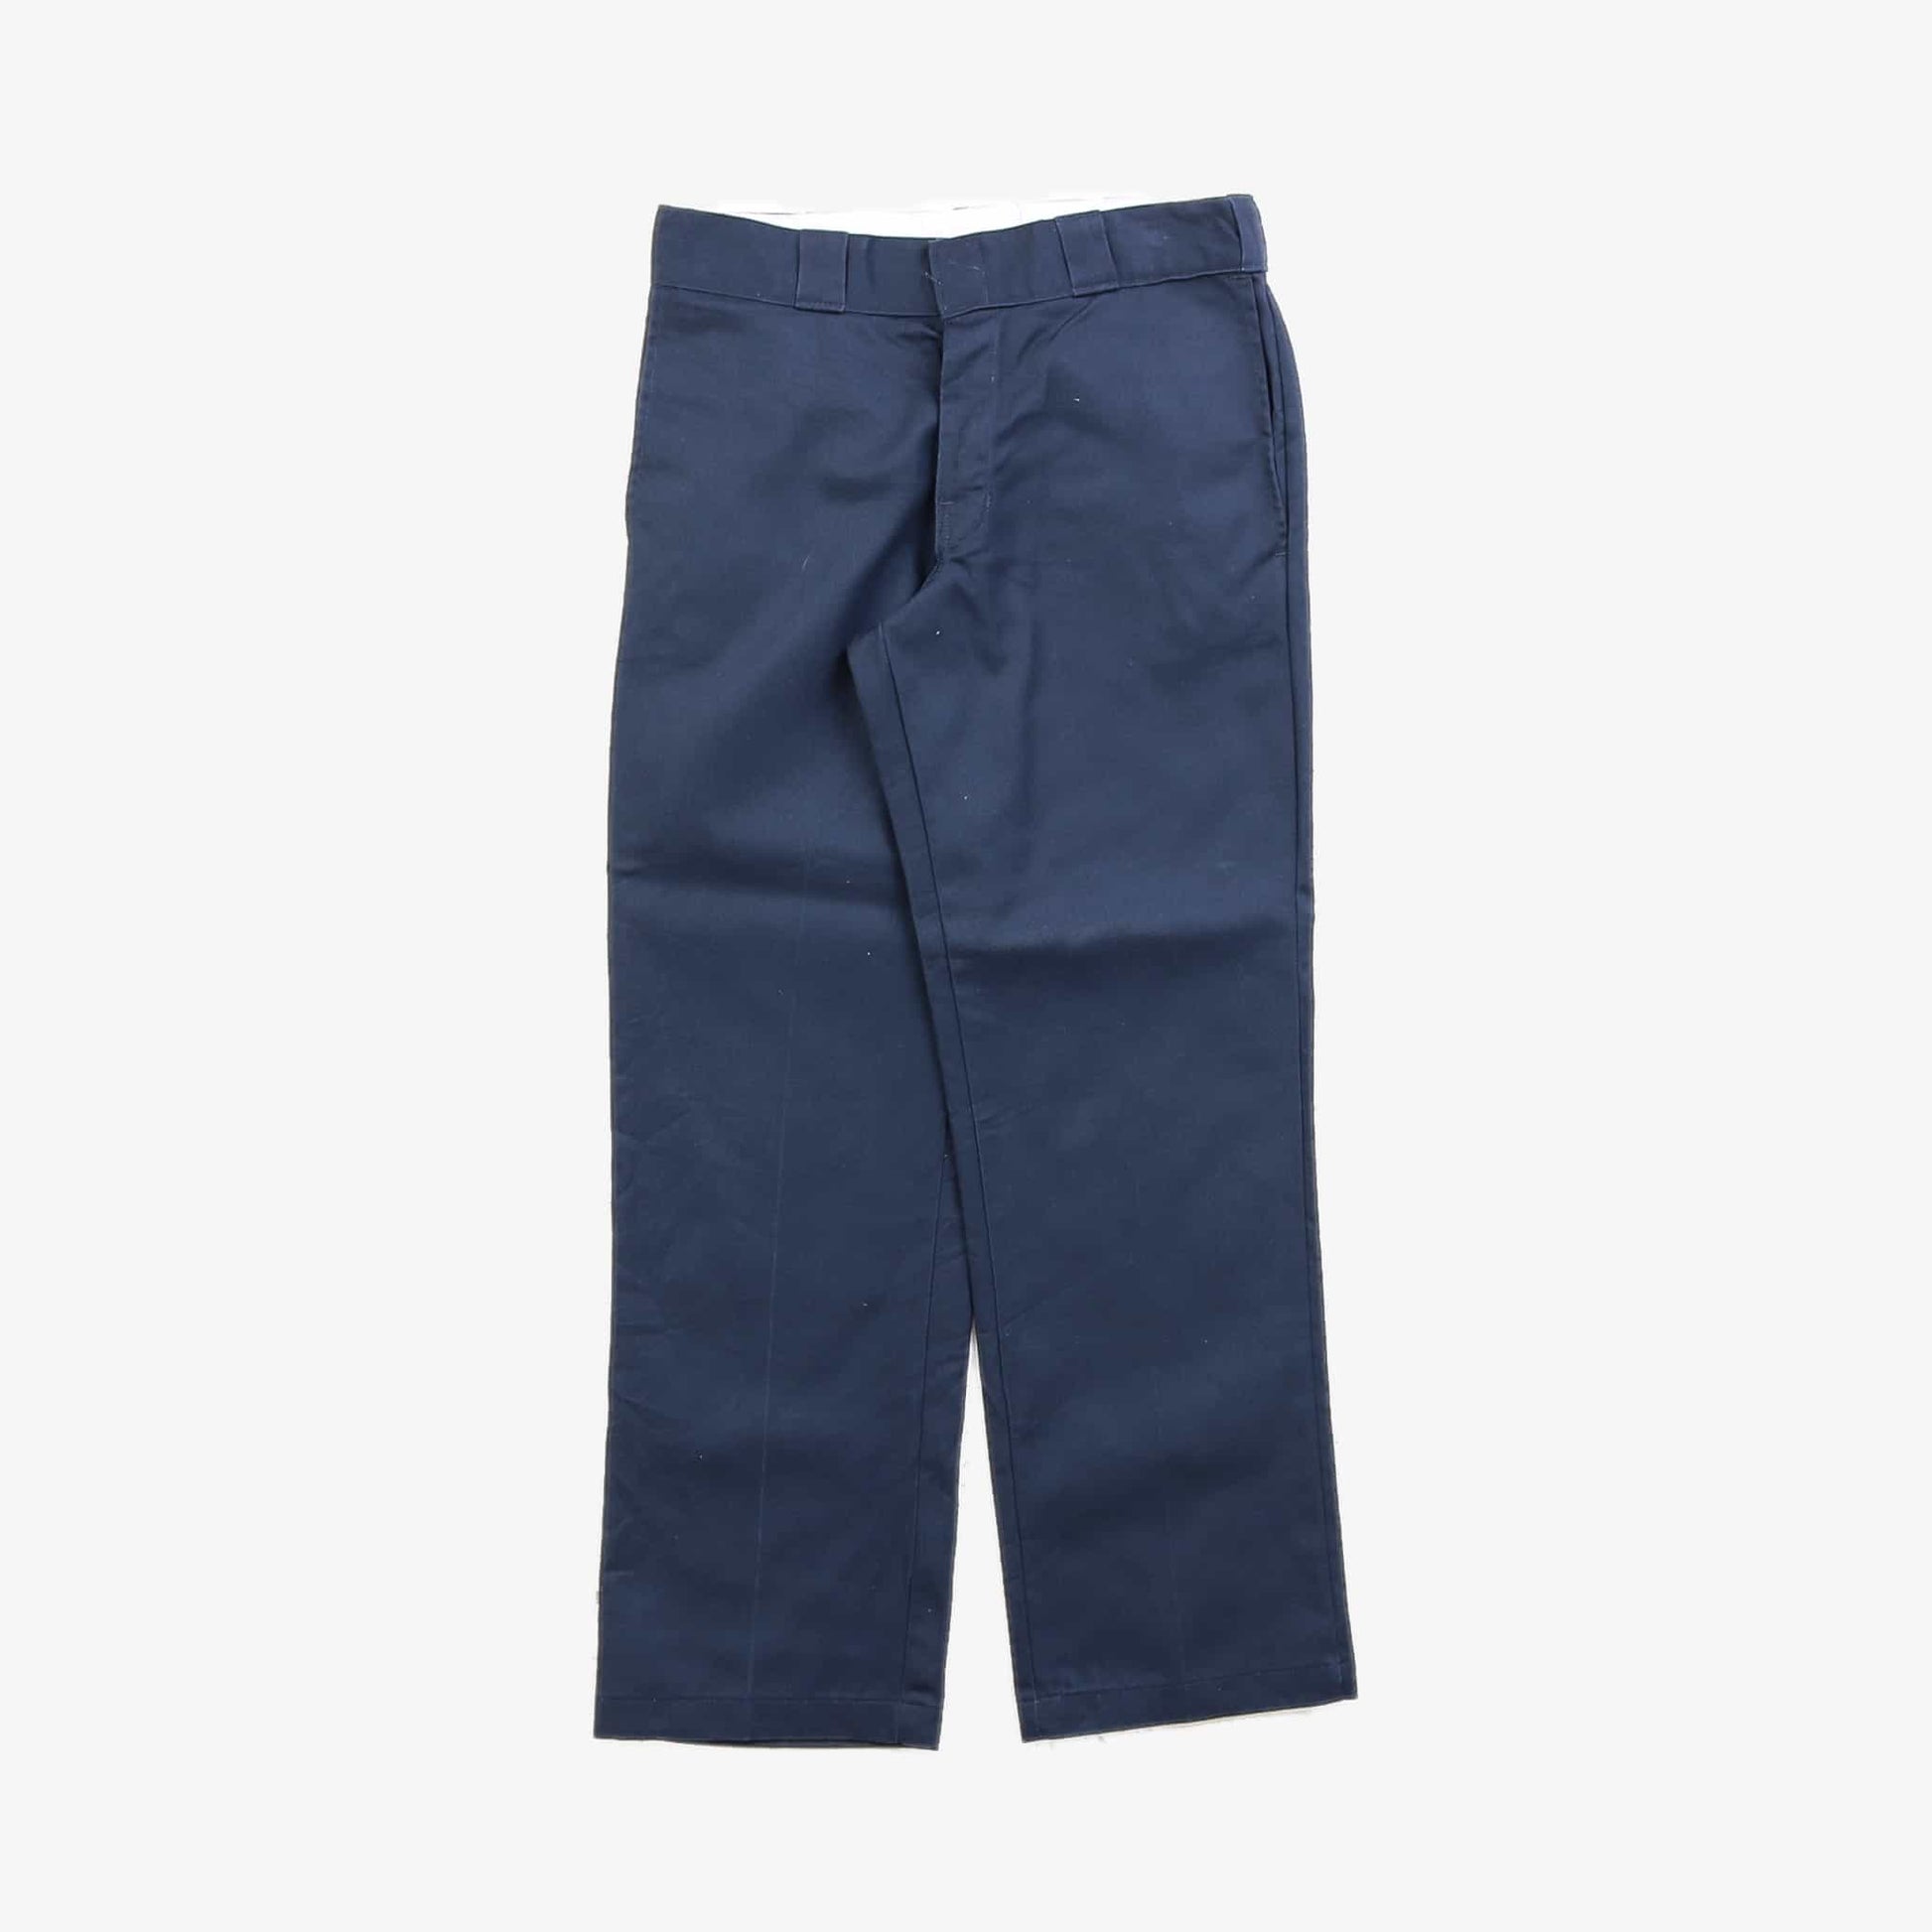 874 Work Trousers - Navy - 30/30 - American Madness